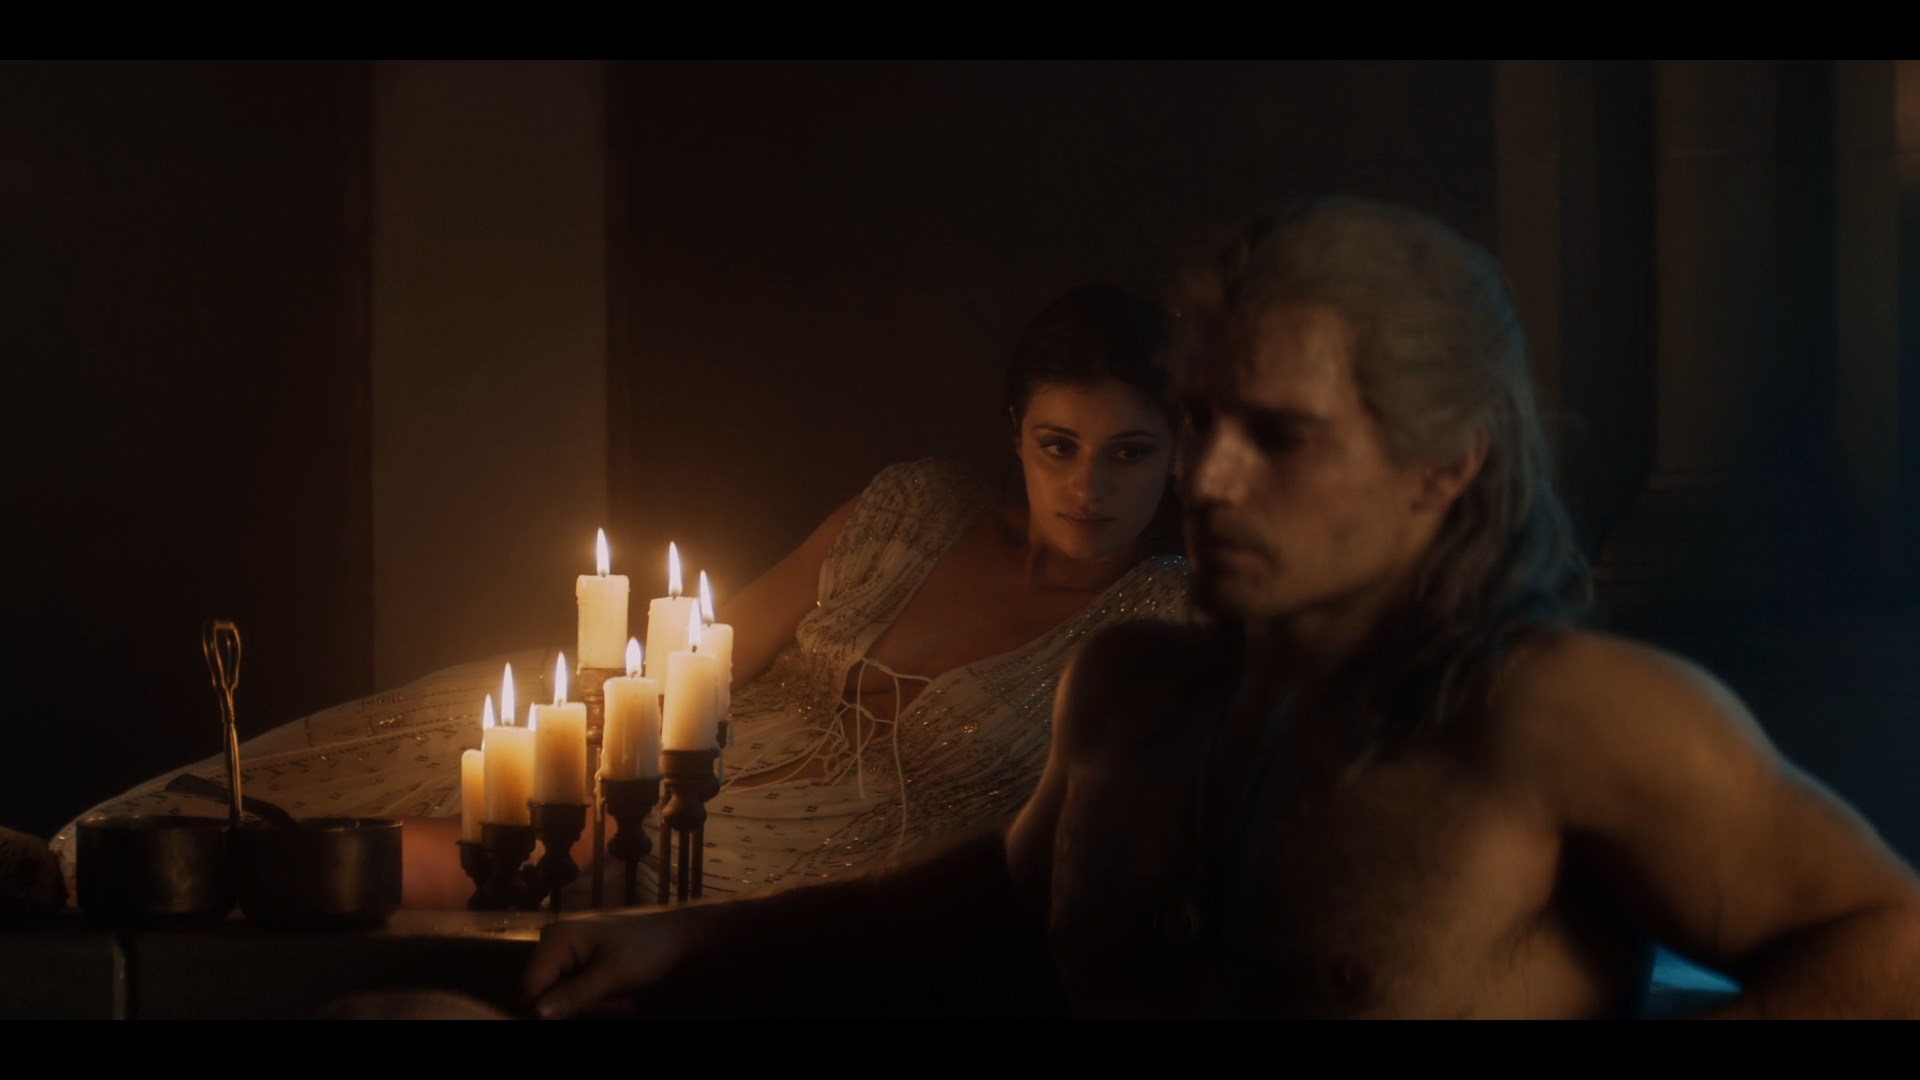 1121072851262_08_Anya.Chalotra-The.Witcher.S01E05.1080p.WEB.NCS.009.jpg.